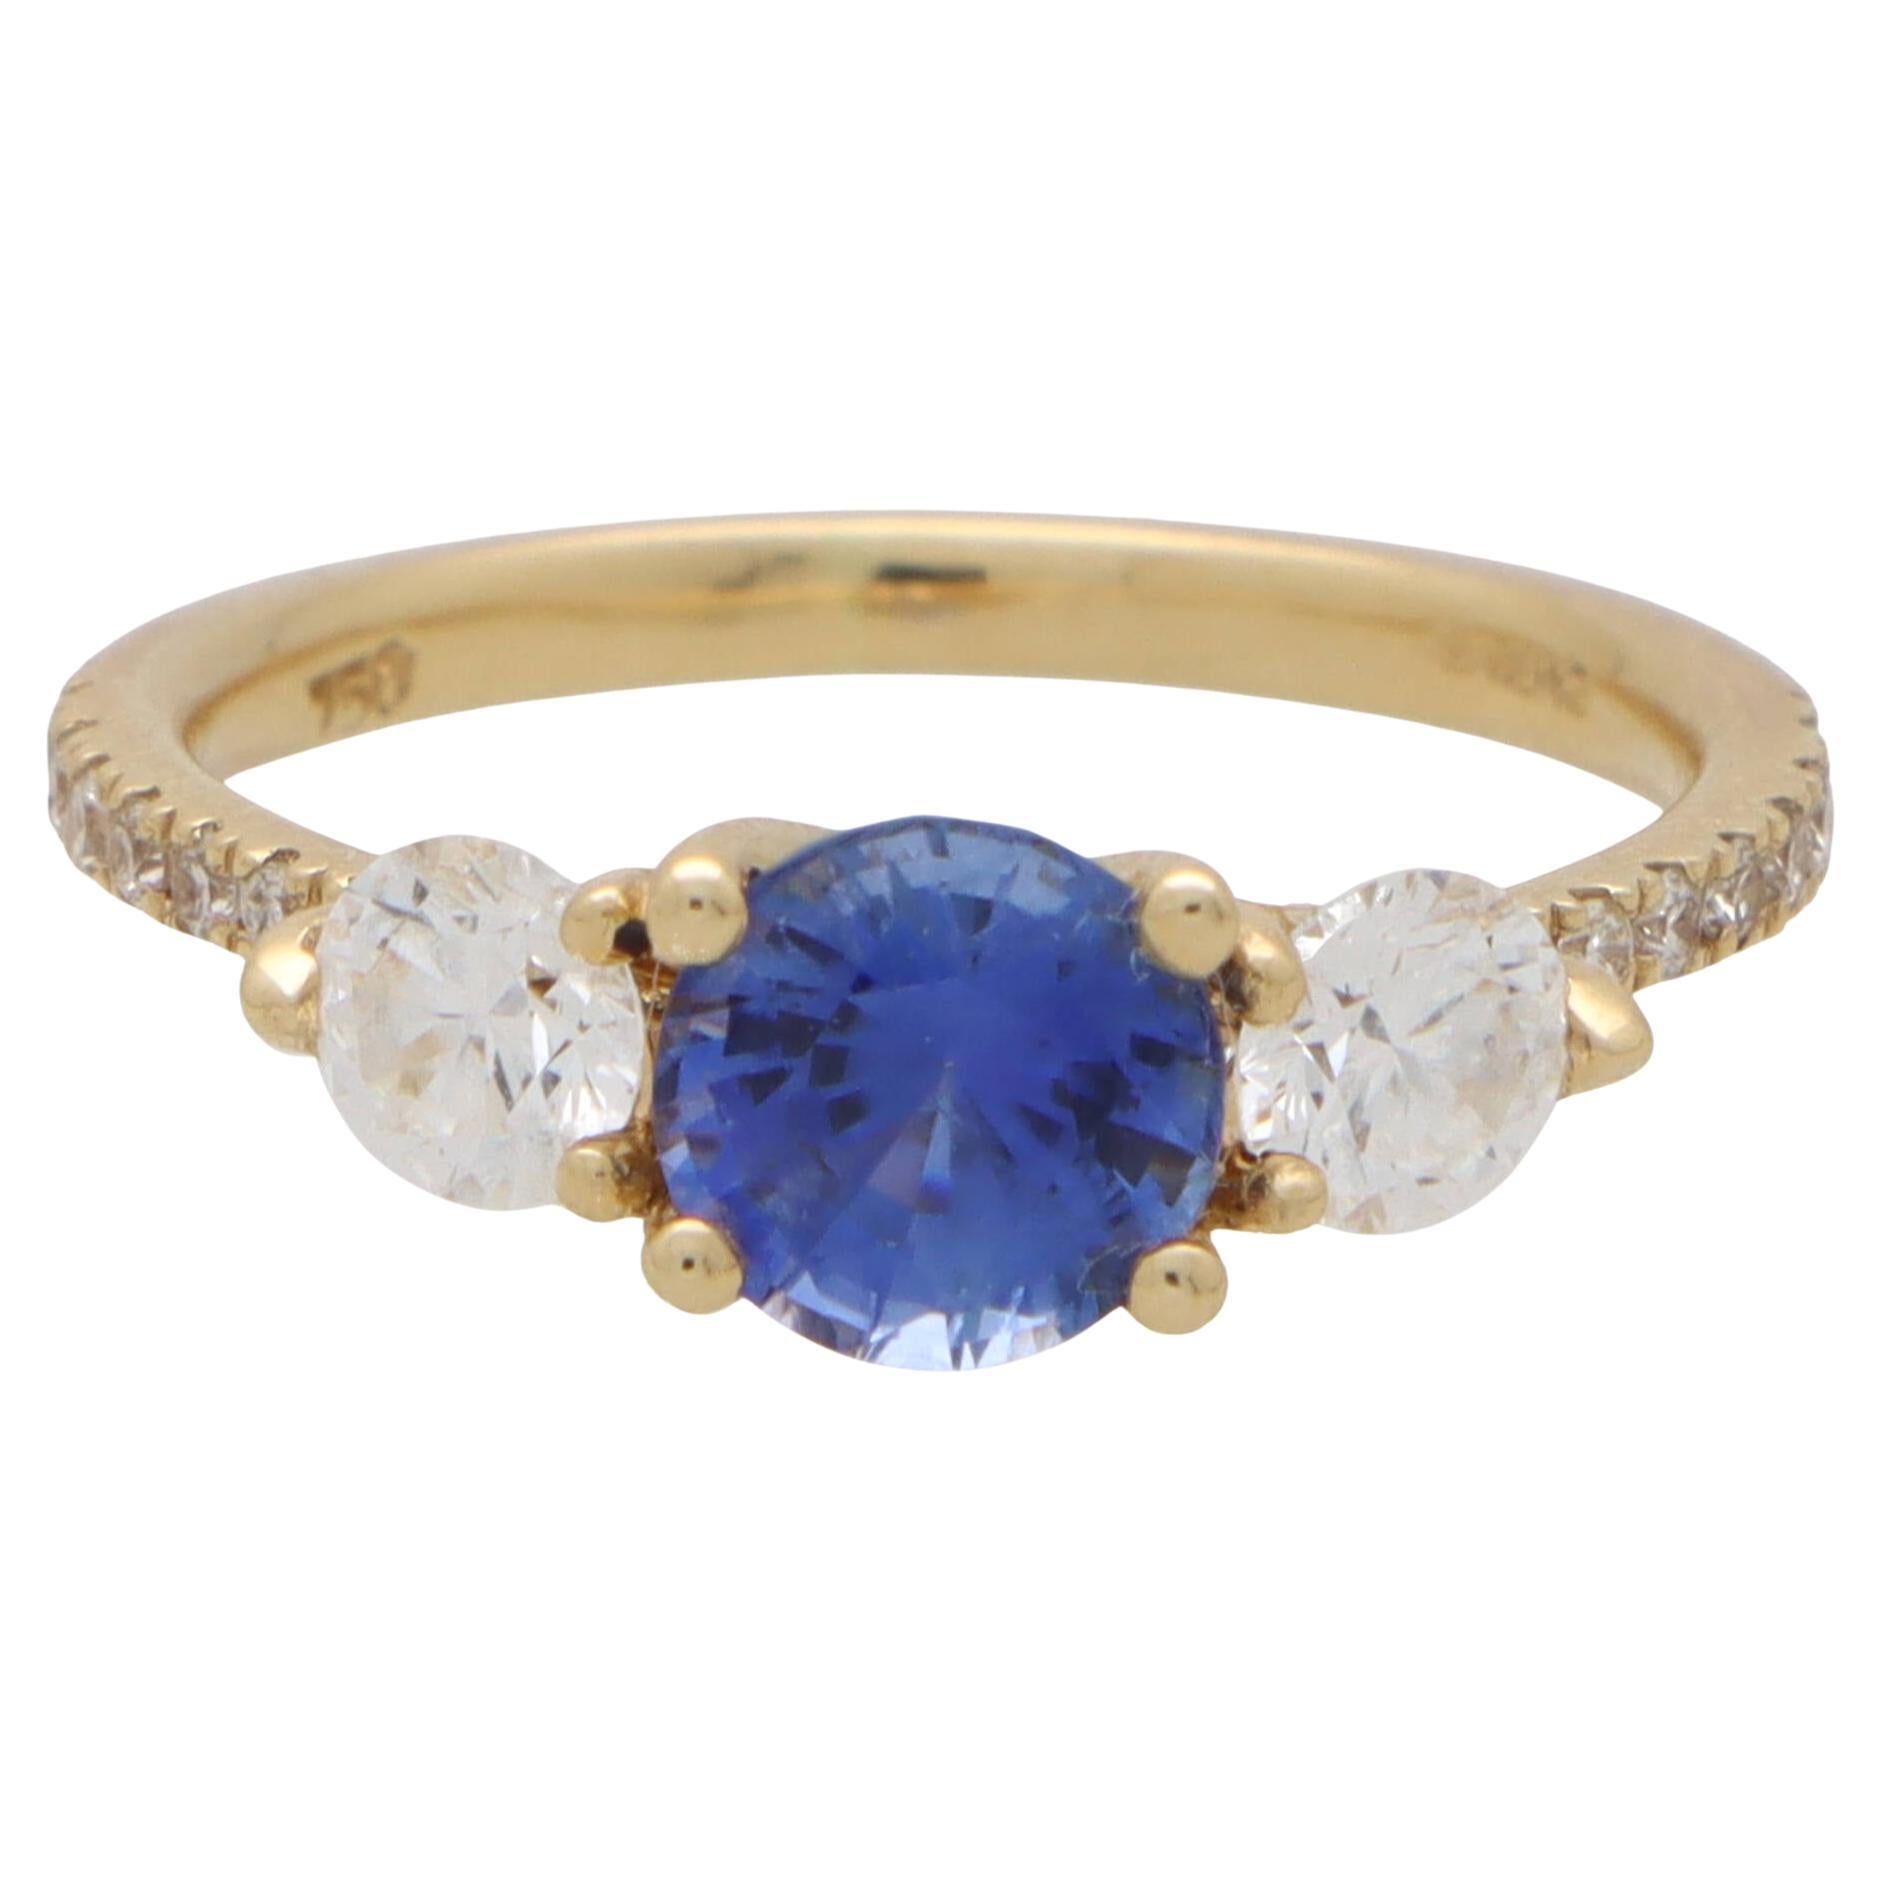 GIA Certified Diamond and Sapphire Ring With Diamond Shoulders in Yellow Gold